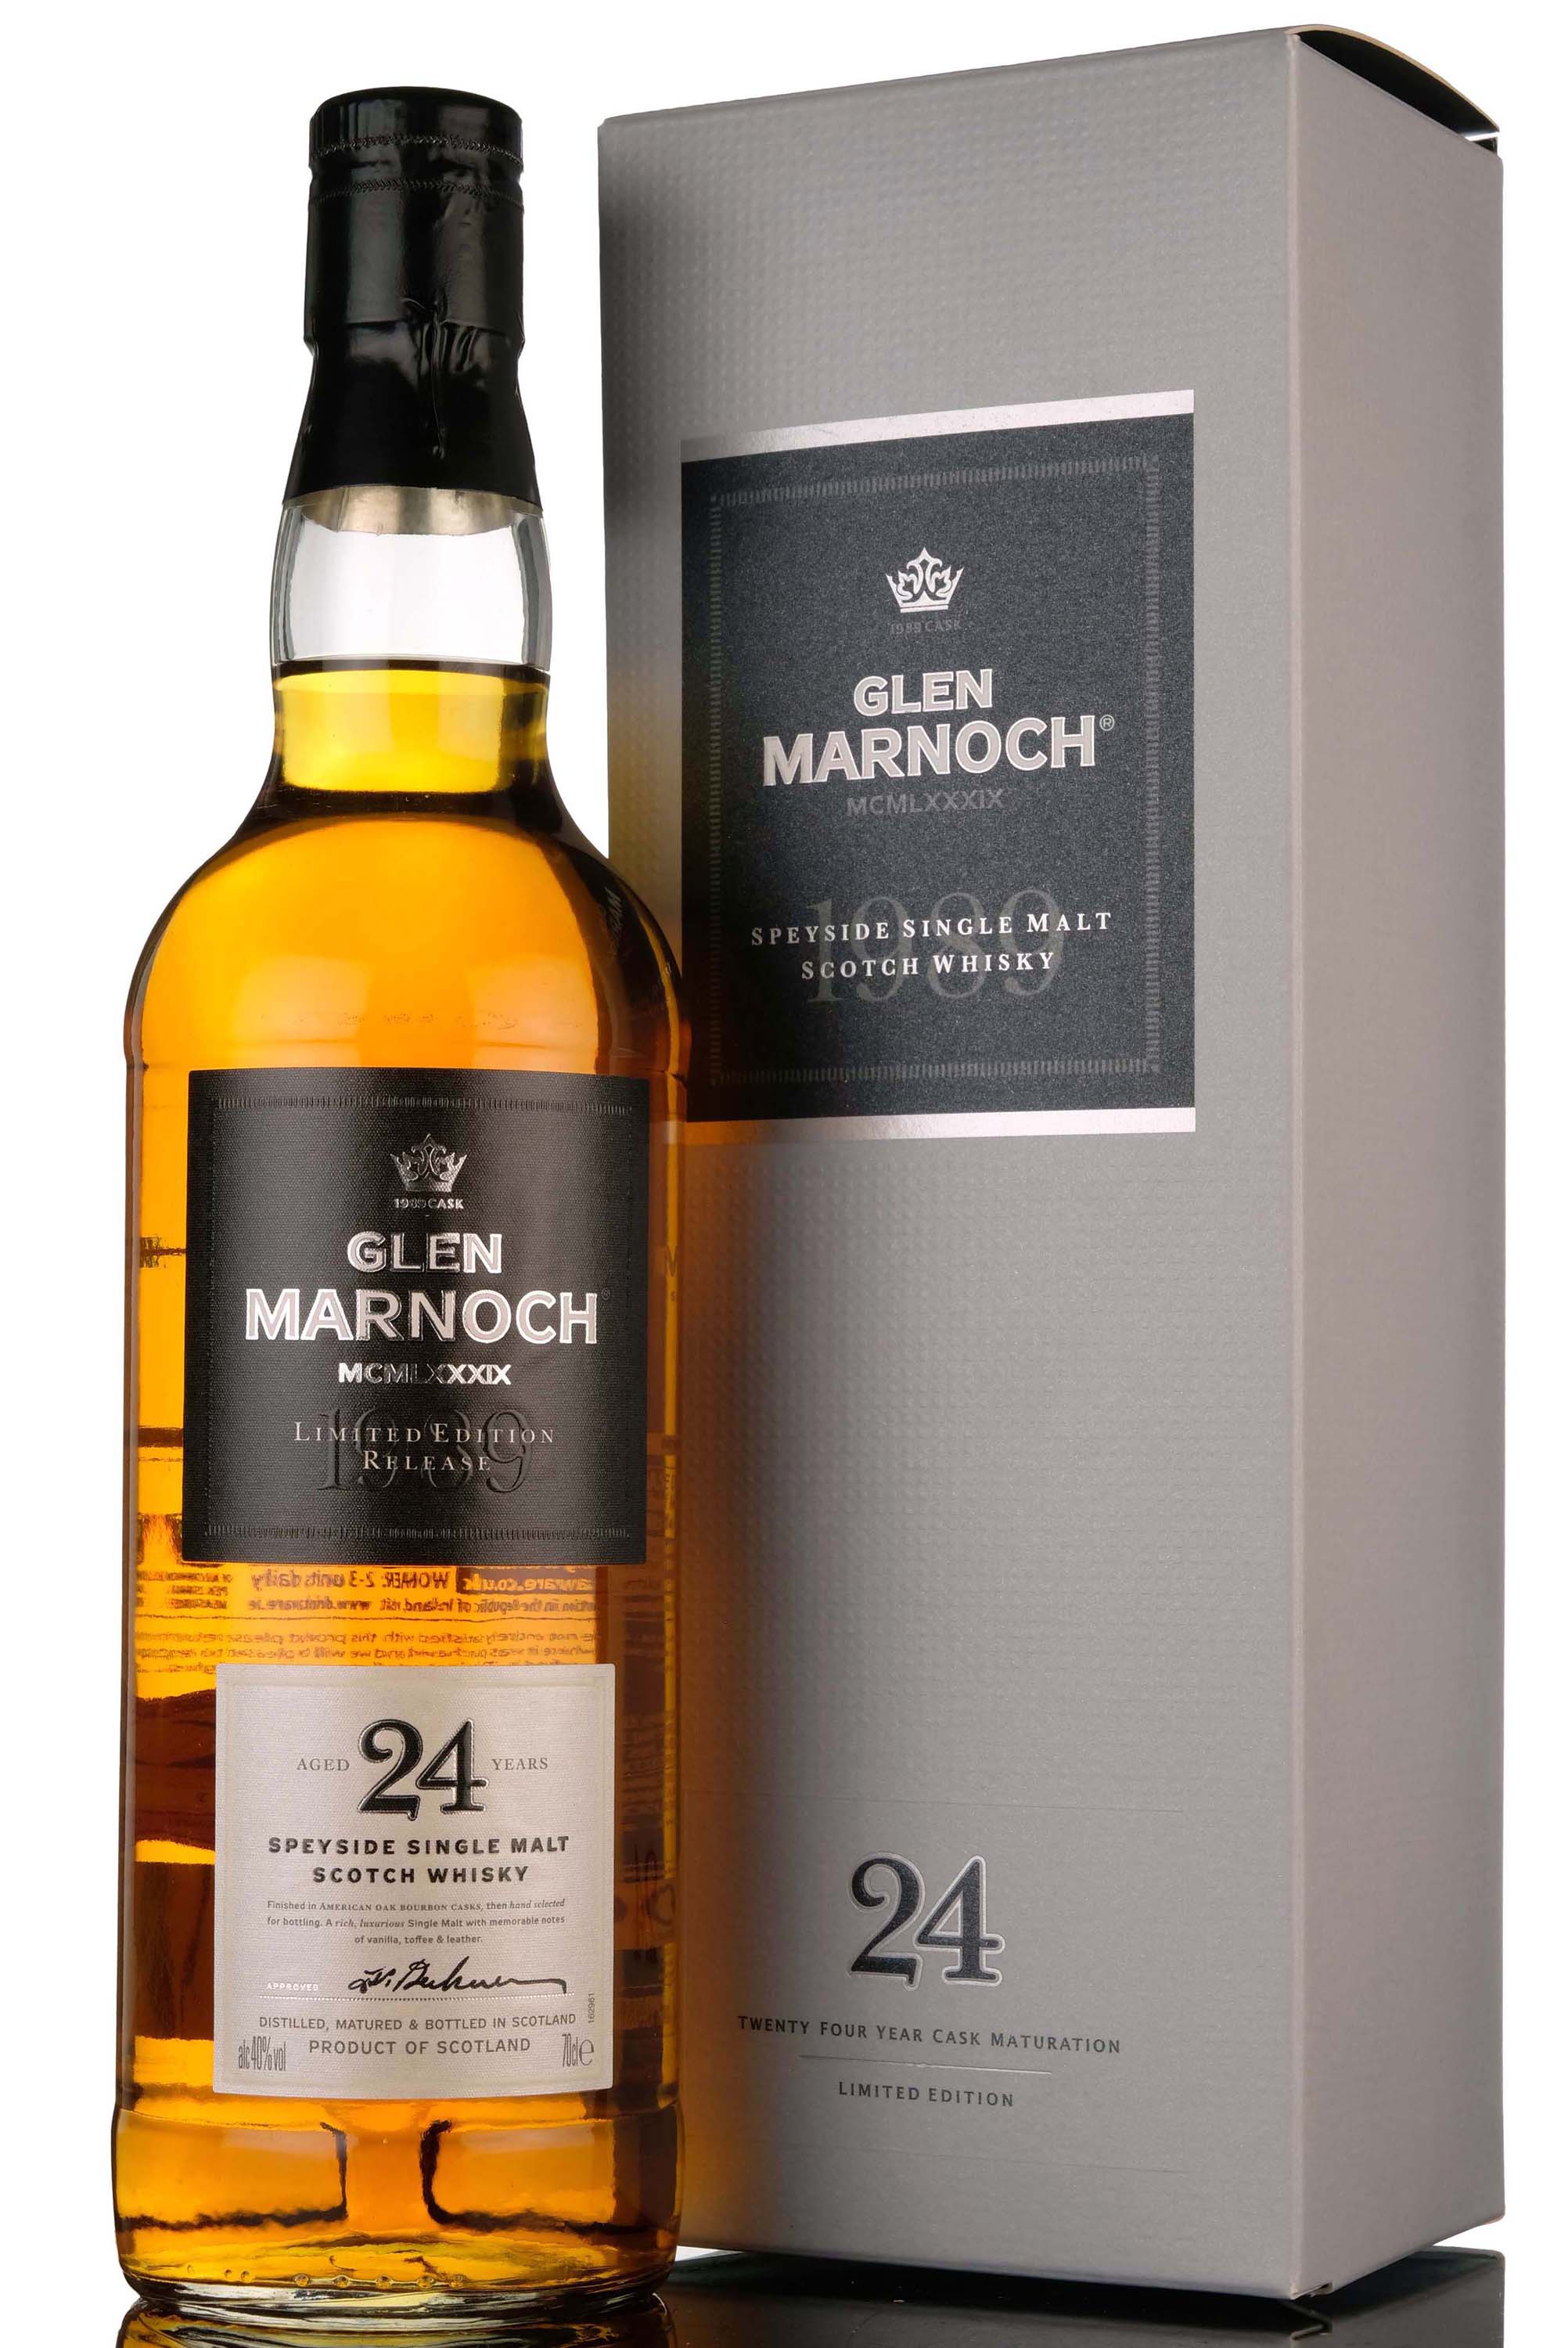 Glen Marnoch 1989 - 24 Year Old - Limited Edition Release